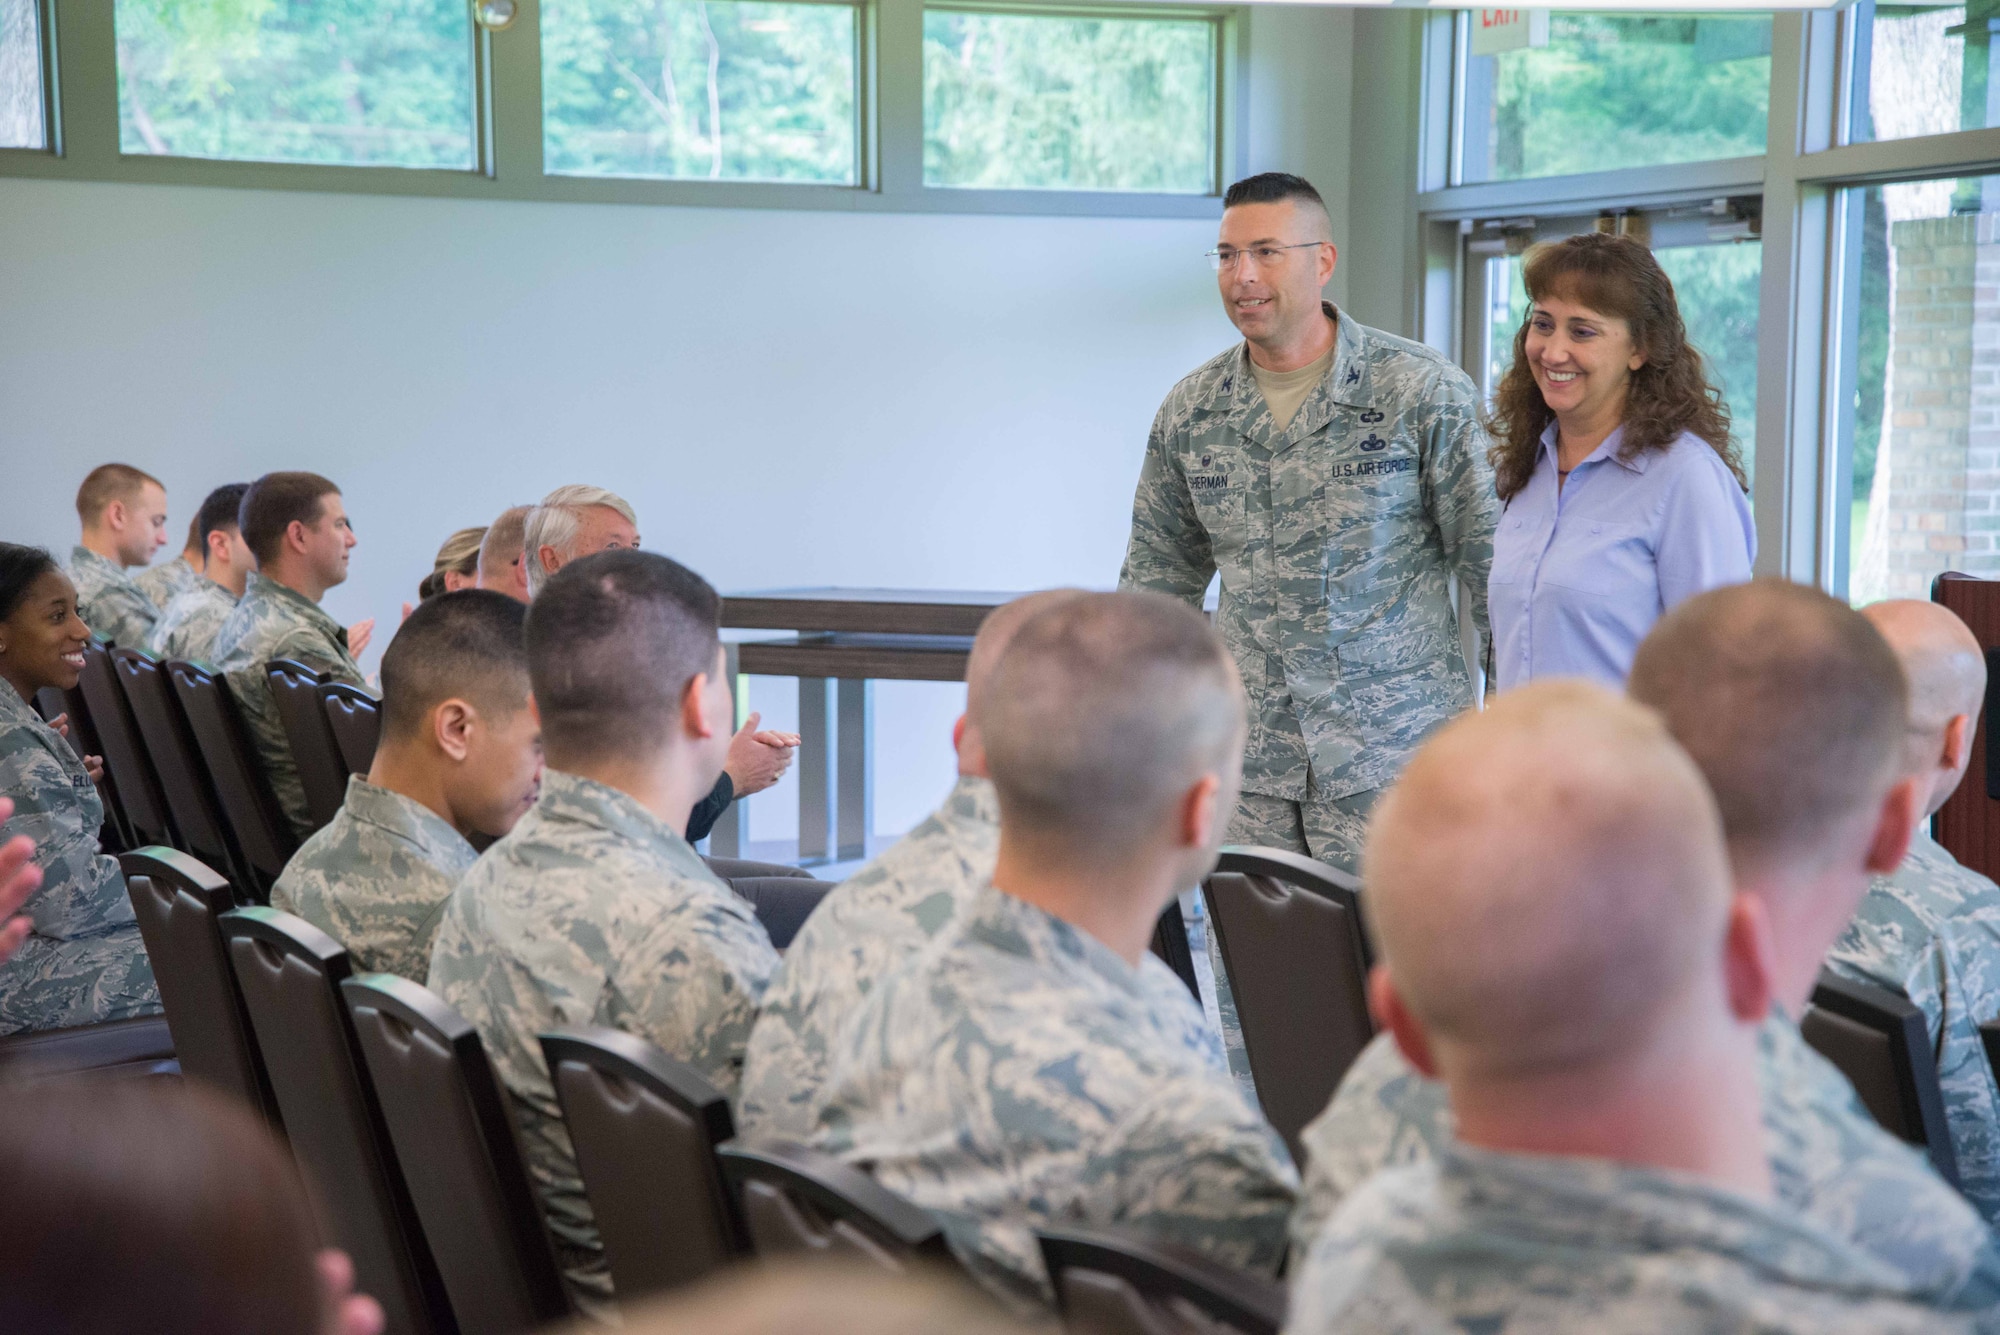 WRIGHT-PATTERSON AIR FORCE BASE, Ohio -- Col. Thomas P. Sherman, 88th Air Base Wing and Installation Commander, talks with Wing Staff Agency personnel at his first commander's call at Wright-Patterson Air Force Base  held at the Twin Base Golf Course June 26. he is accompanied by his wife, Laurie. Sherman took command one week earlier in a ceremony at the National Museum of the United States Air Force June 19. (U.S. Air Force photo/John Harrington)